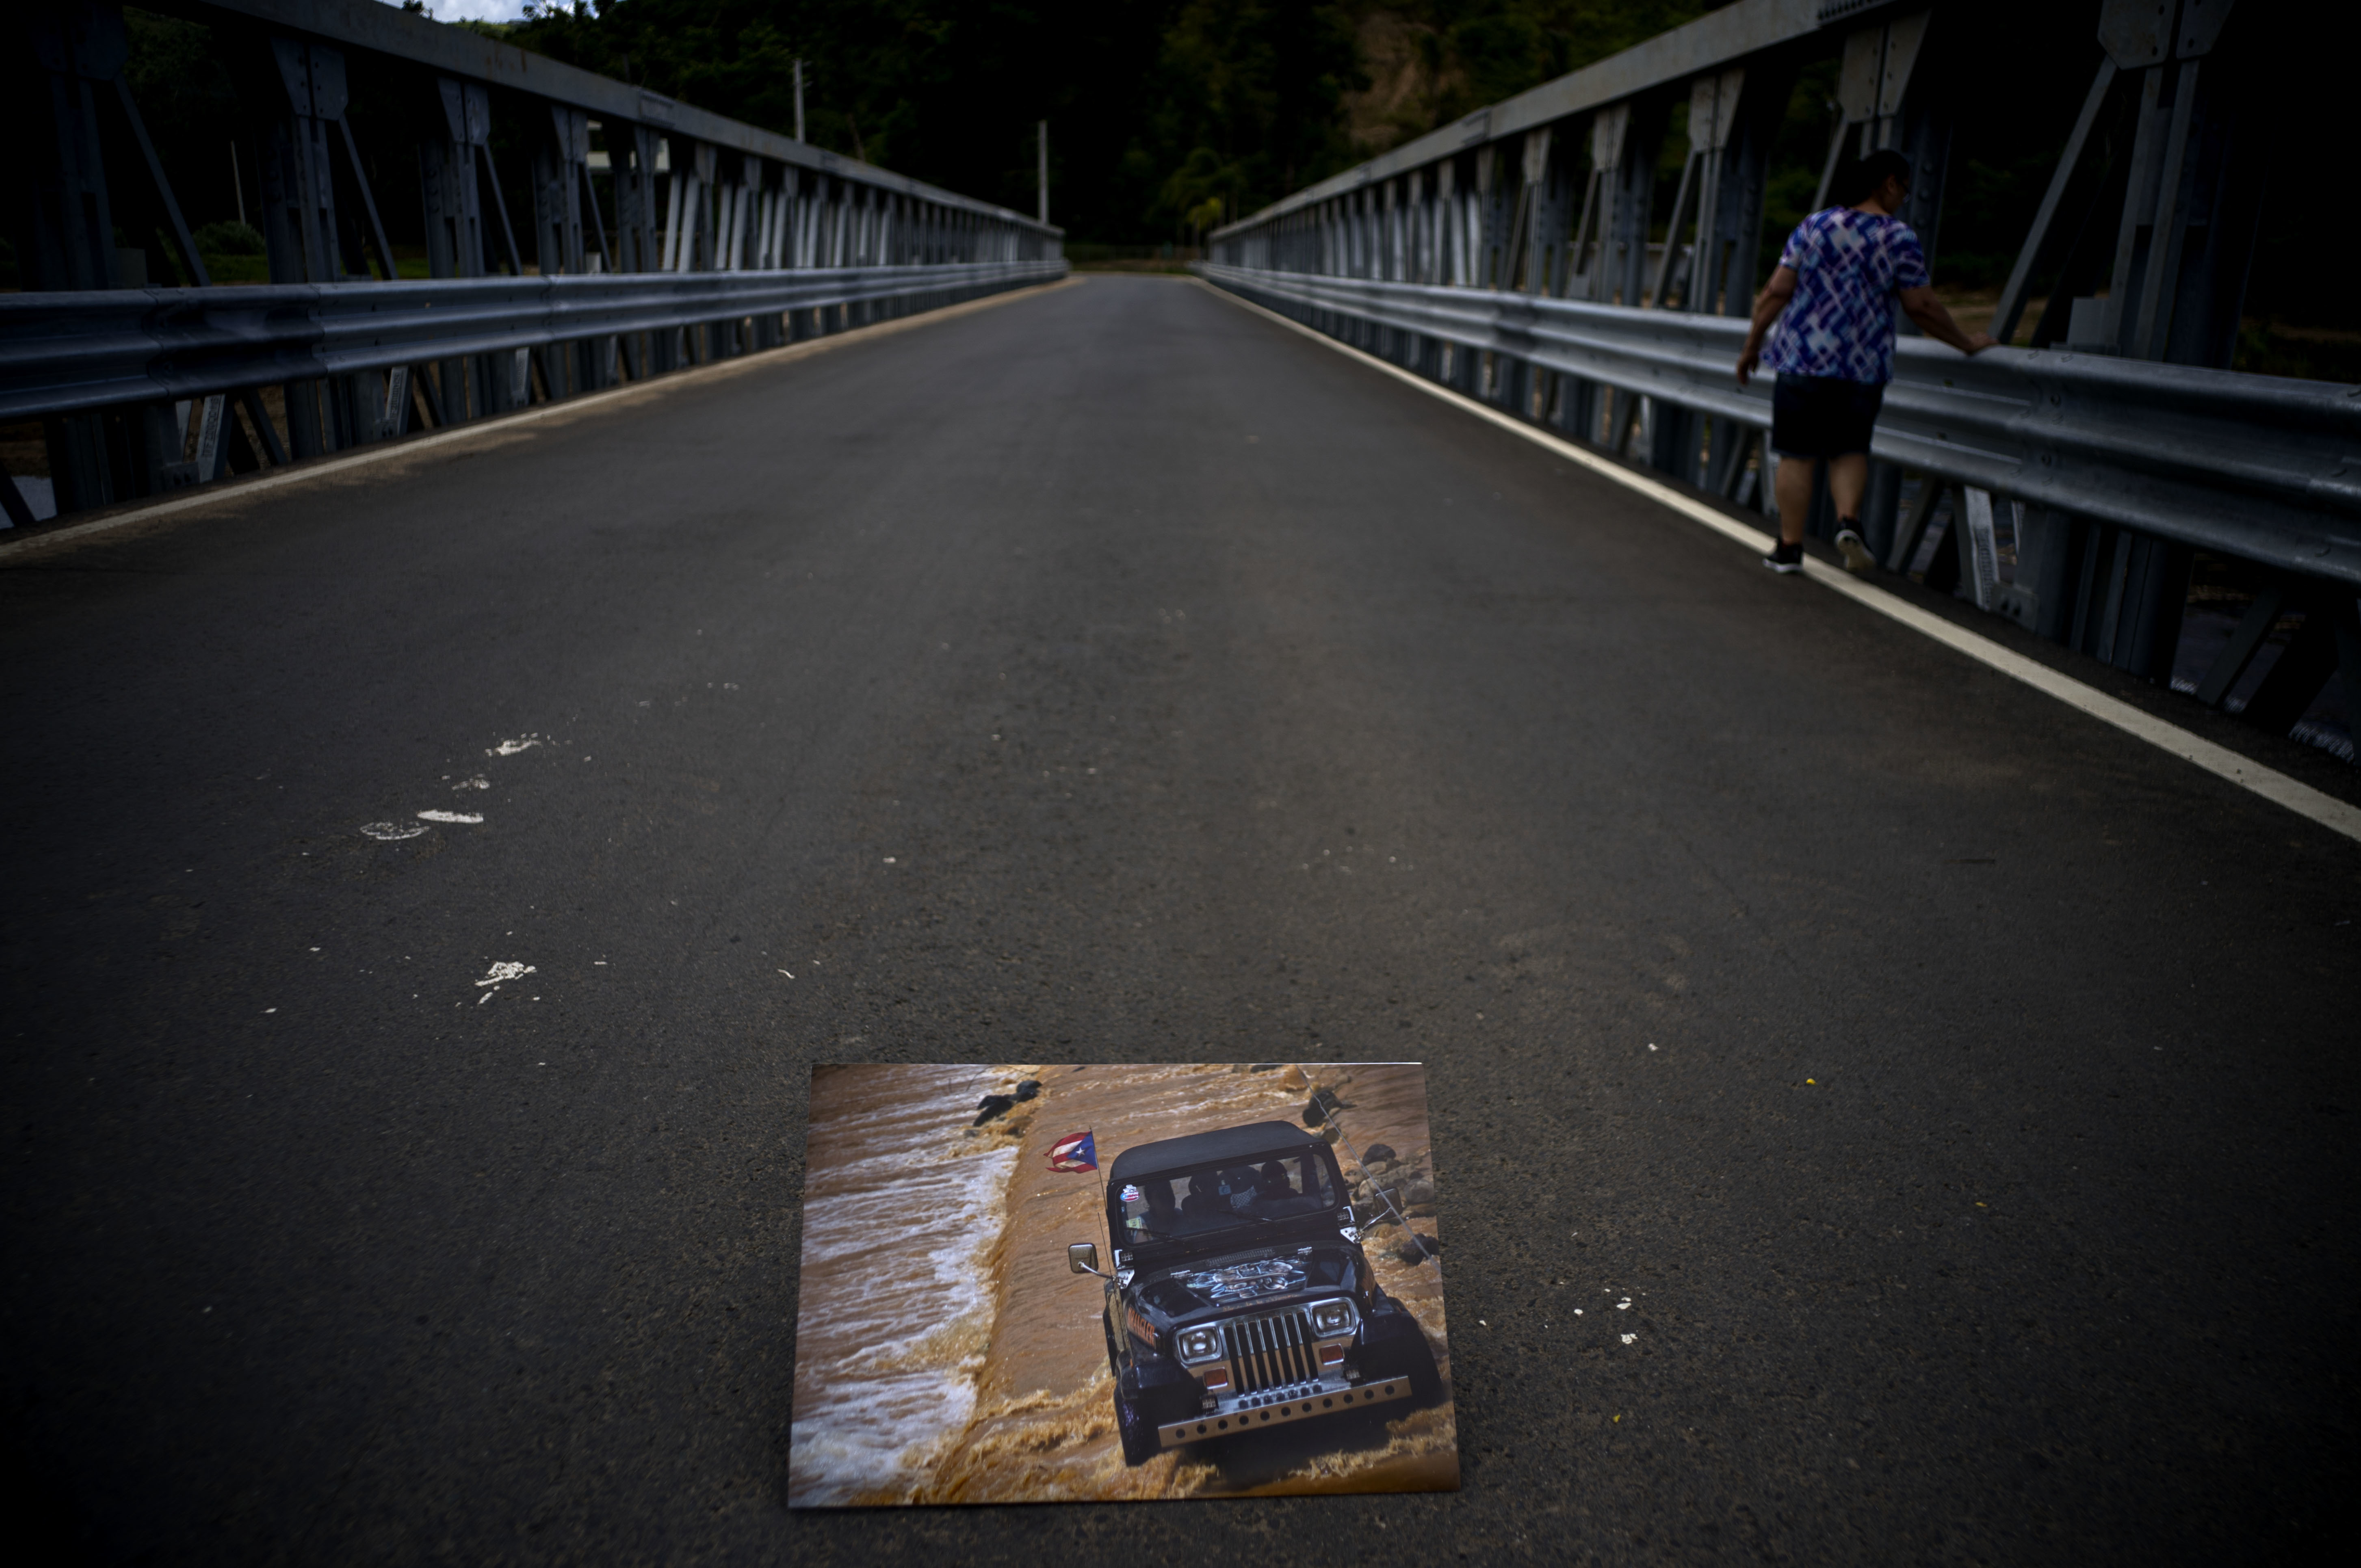 A printed photograph of a jeep crossing a river on Oct. 7, 2017 sits placed on a new bridge that stands above the spot where the print was taken after Hurricane Maria washed out the old bridge in the San Lorenzo neighborhood of Morovis, Puerto Rico, May 26, 2018. People on both sides of the bridge were left stranded when it collapsed, turning a 45 minute commute to the other side into a three hour oddesy. (AP Photo/Ramon Espinosa)